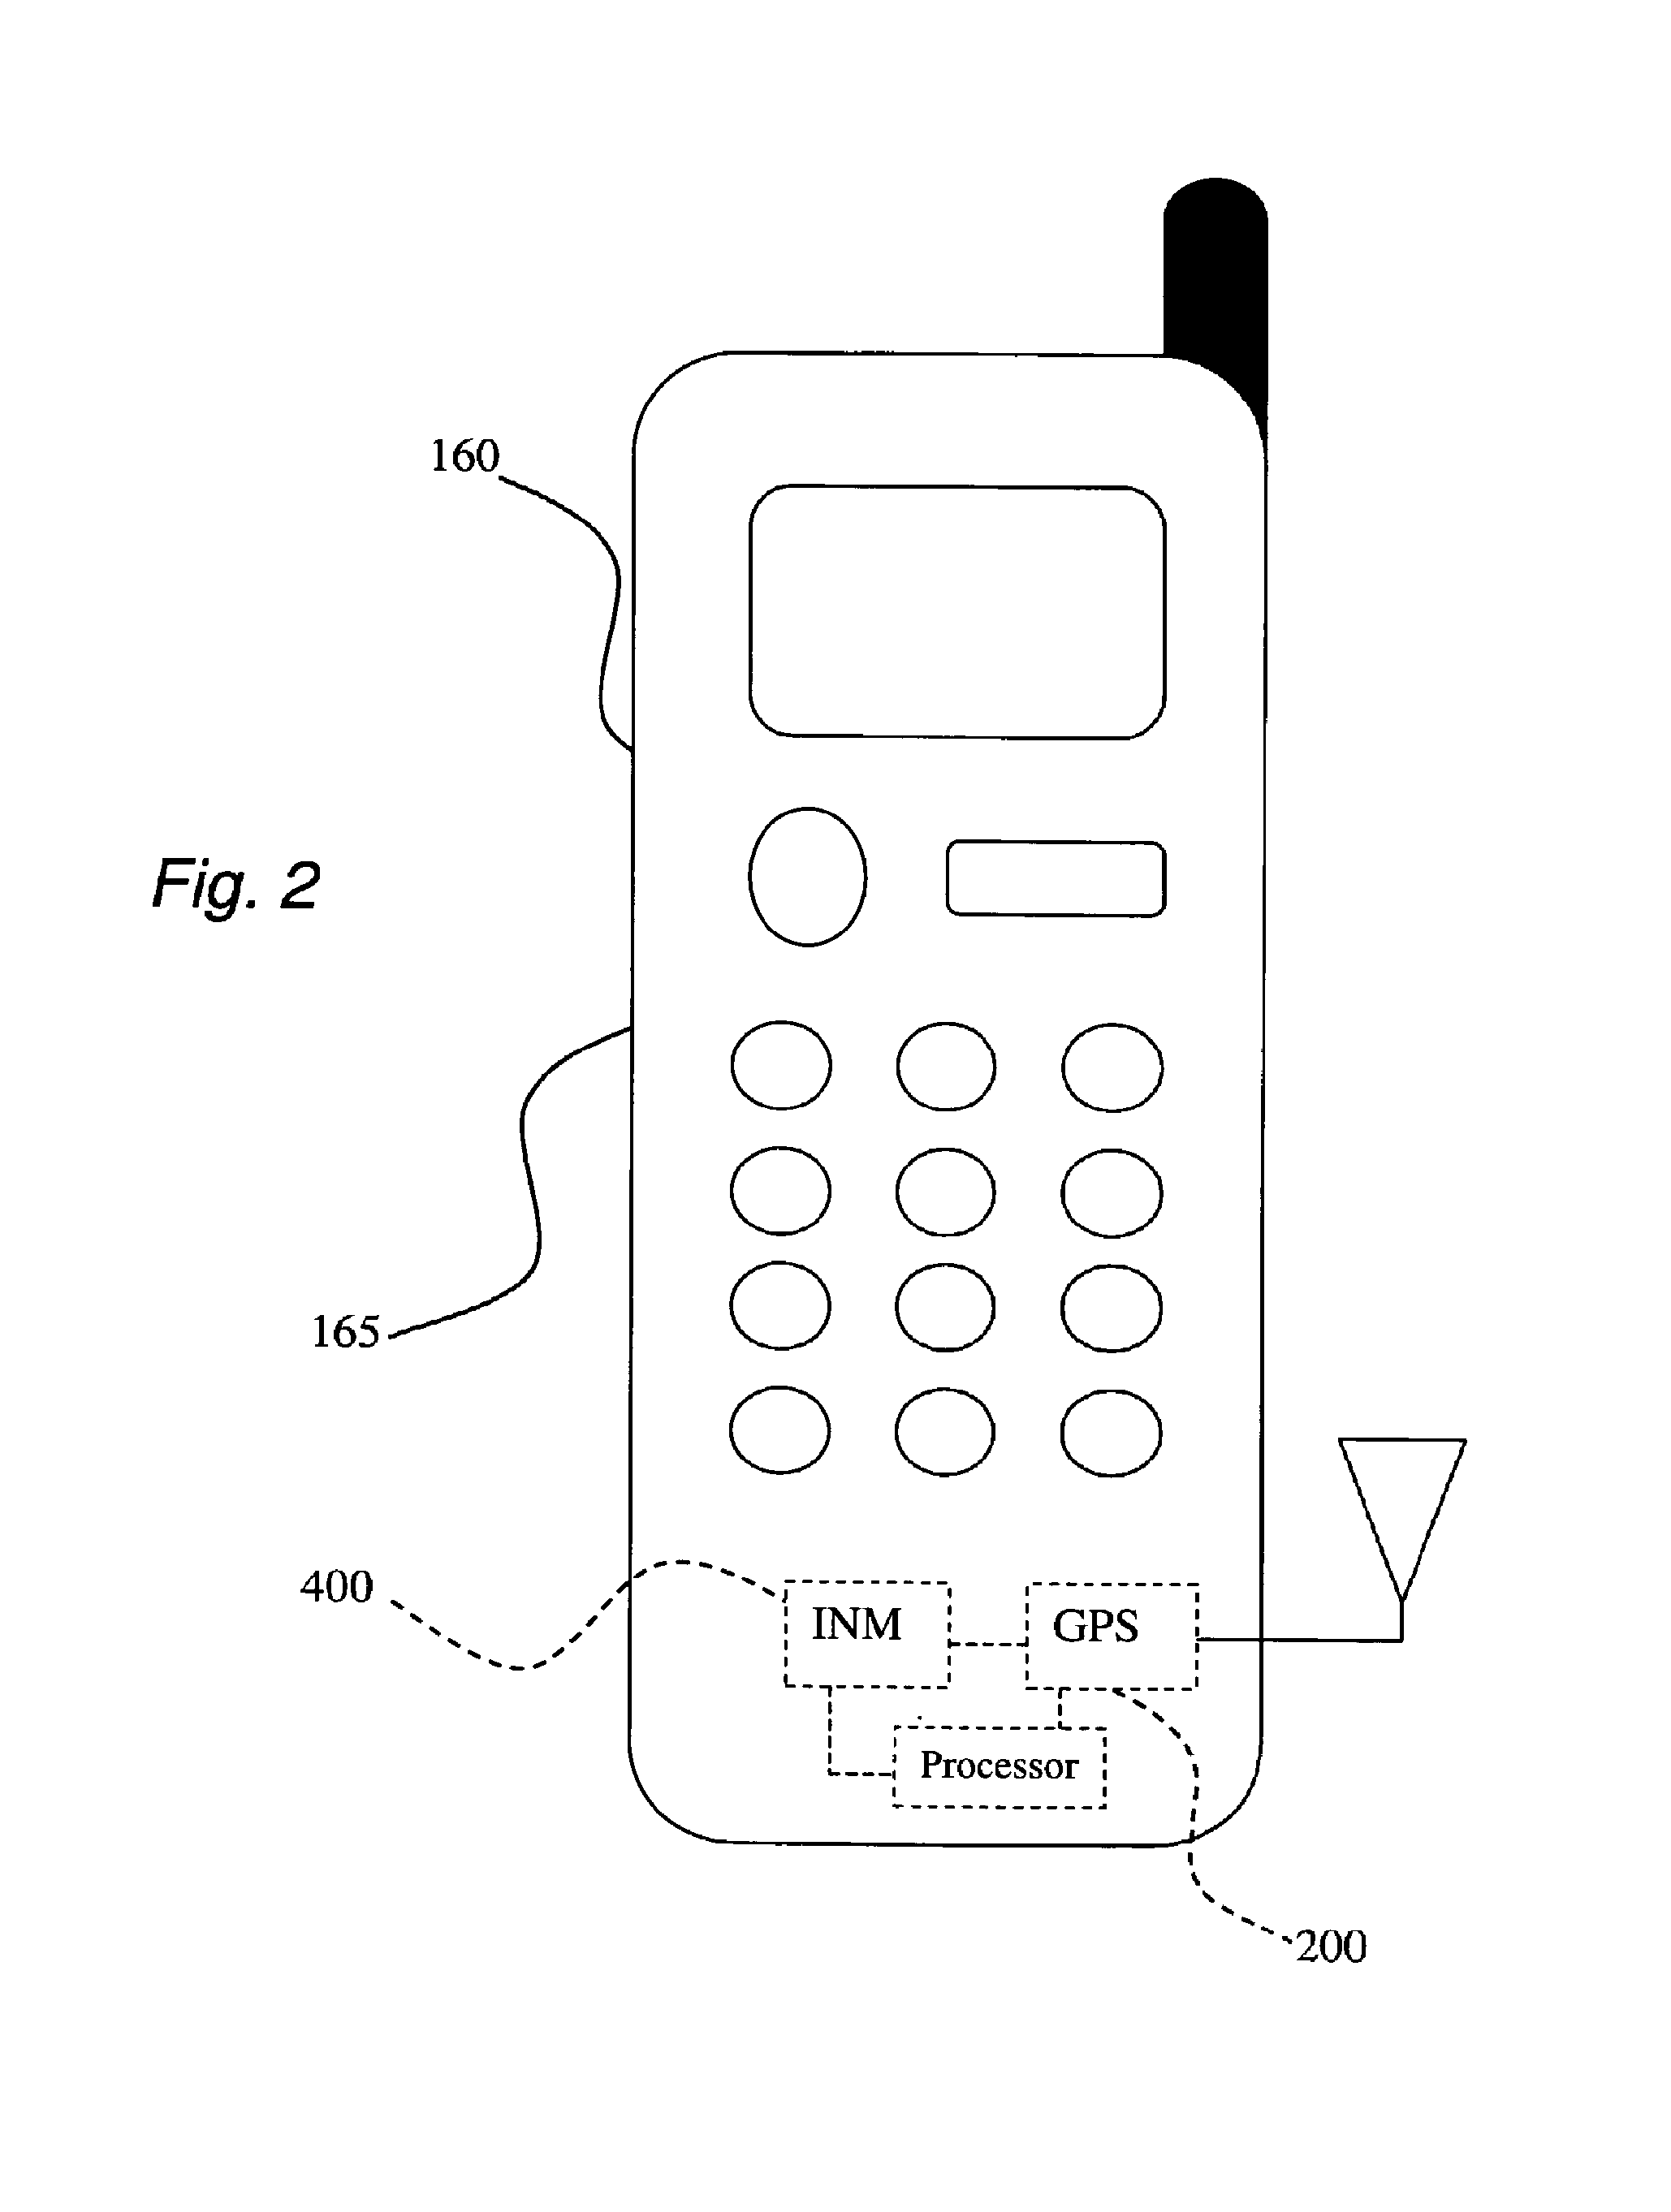 Method for detecting misuse of identity in electronic transactions